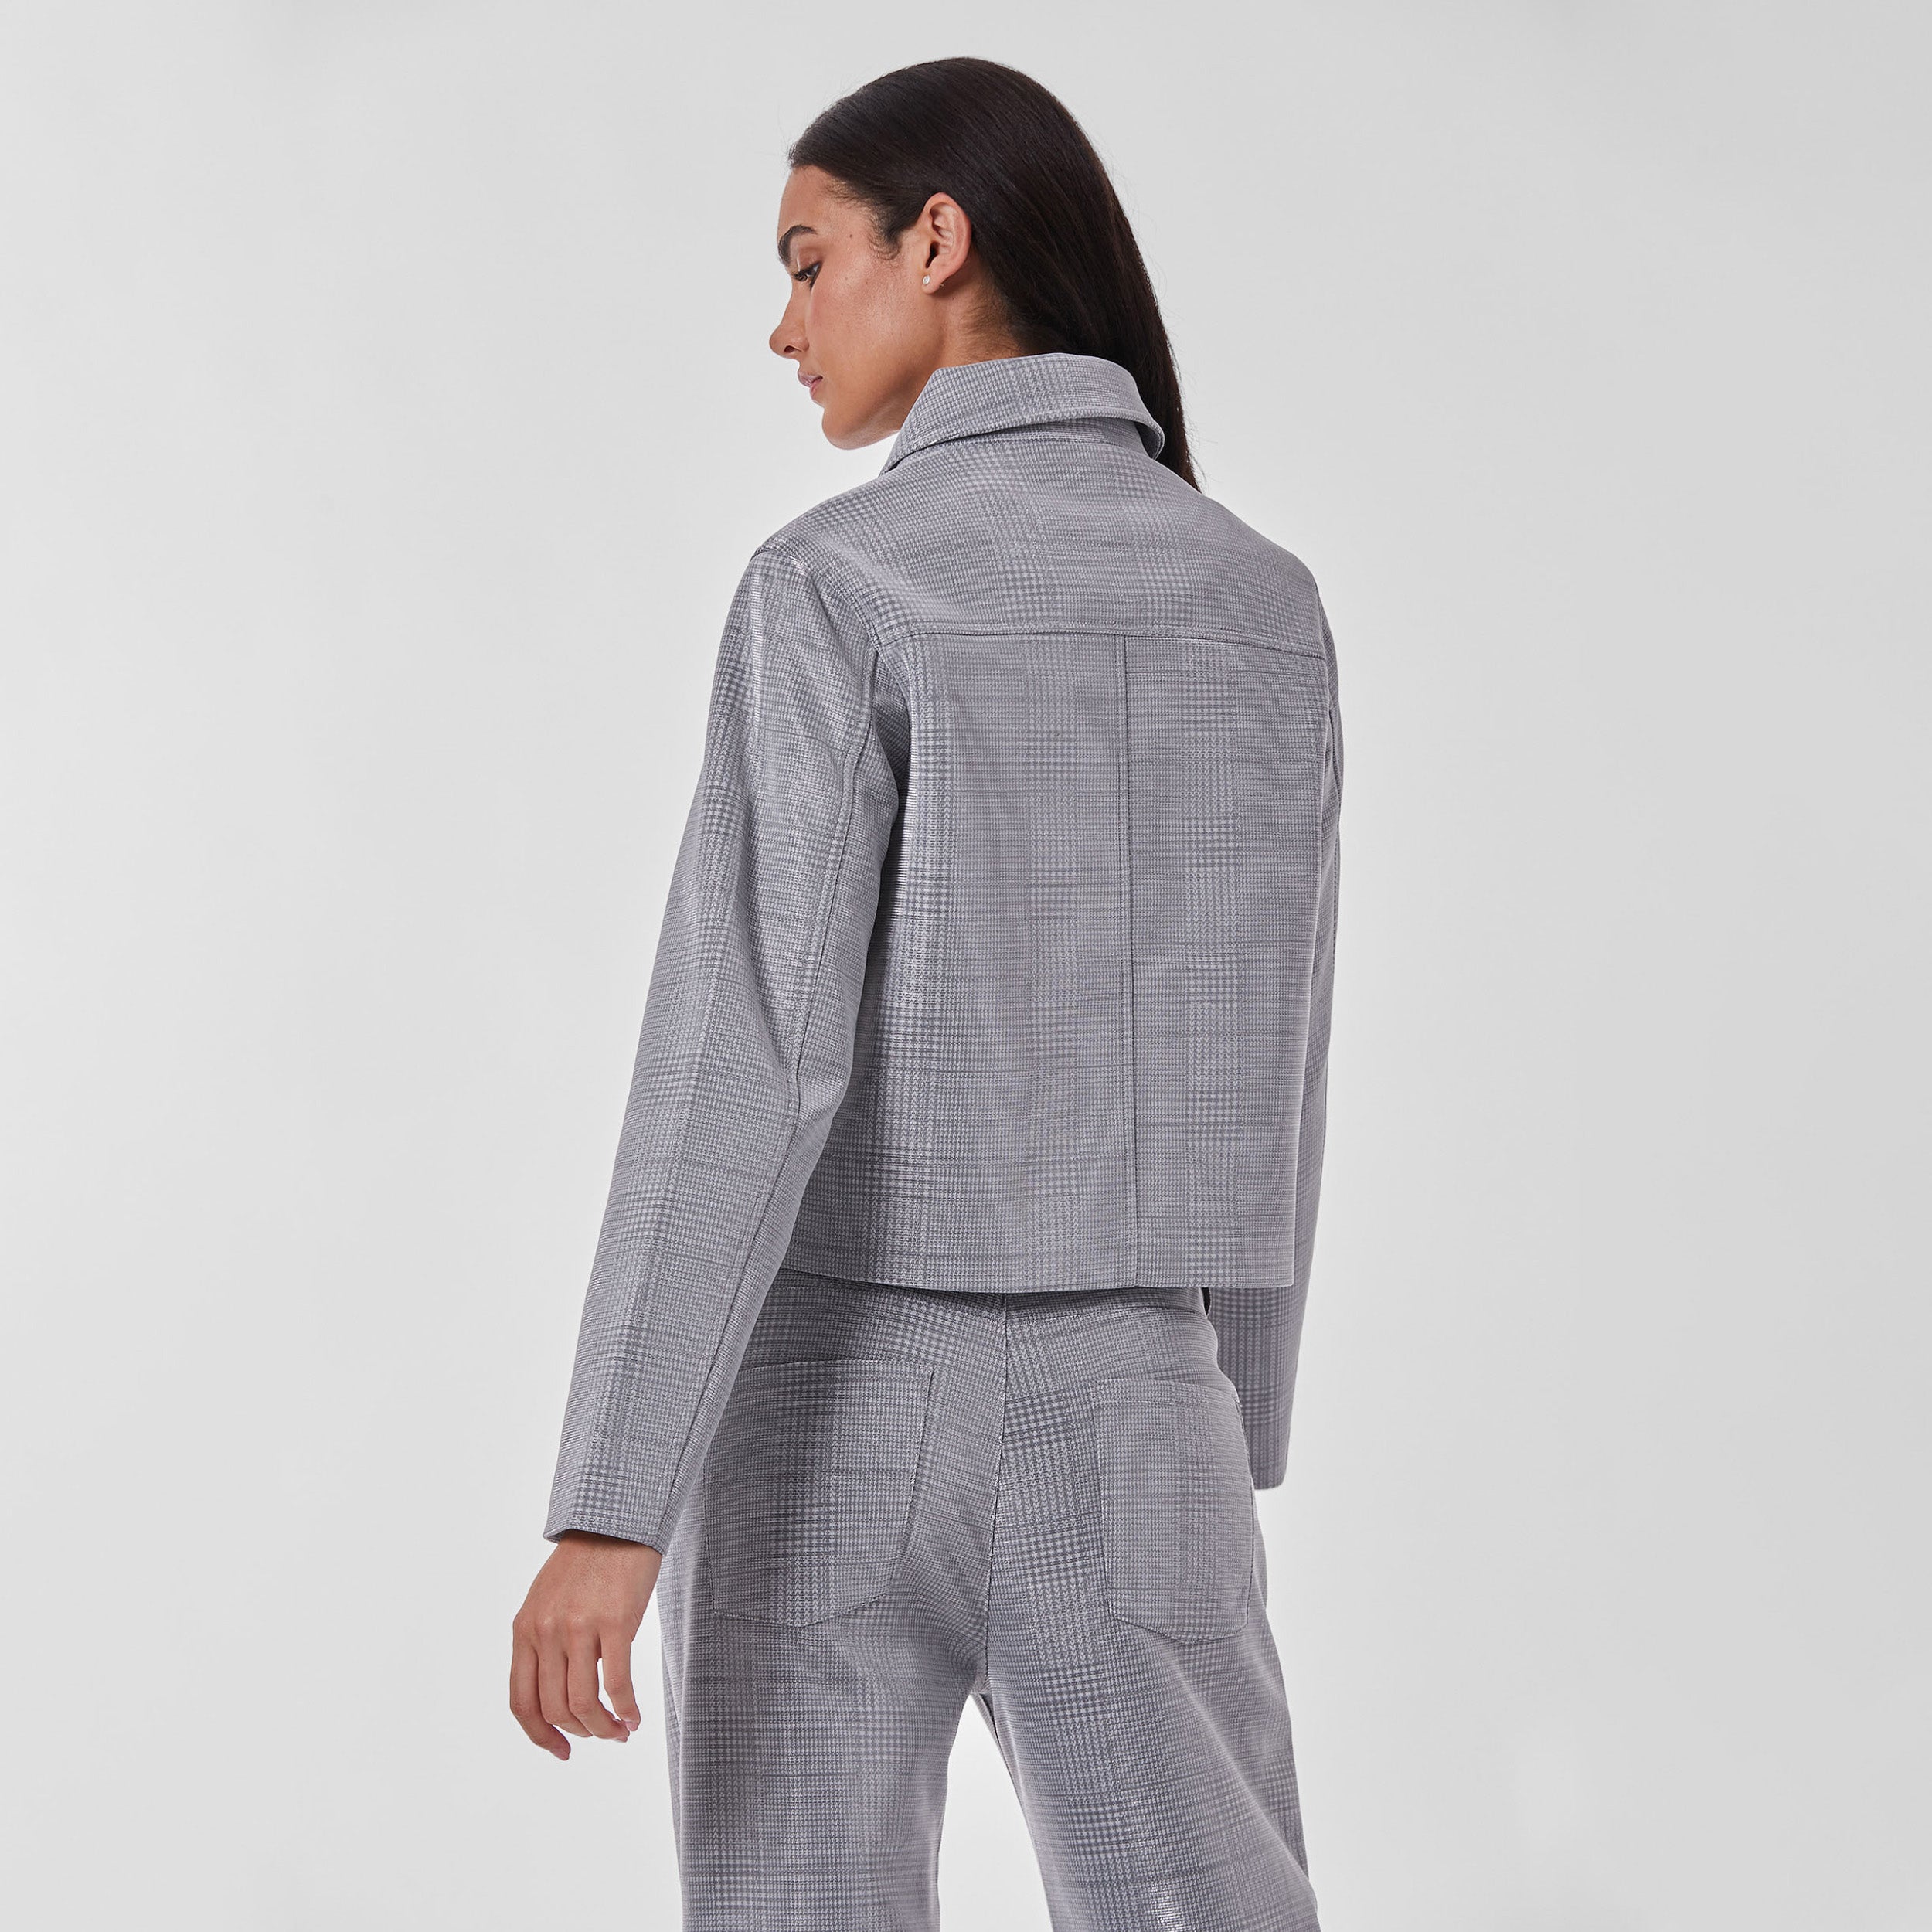 Rear view of woman wearing silver plaid patterned cropped jacket and matching pants.